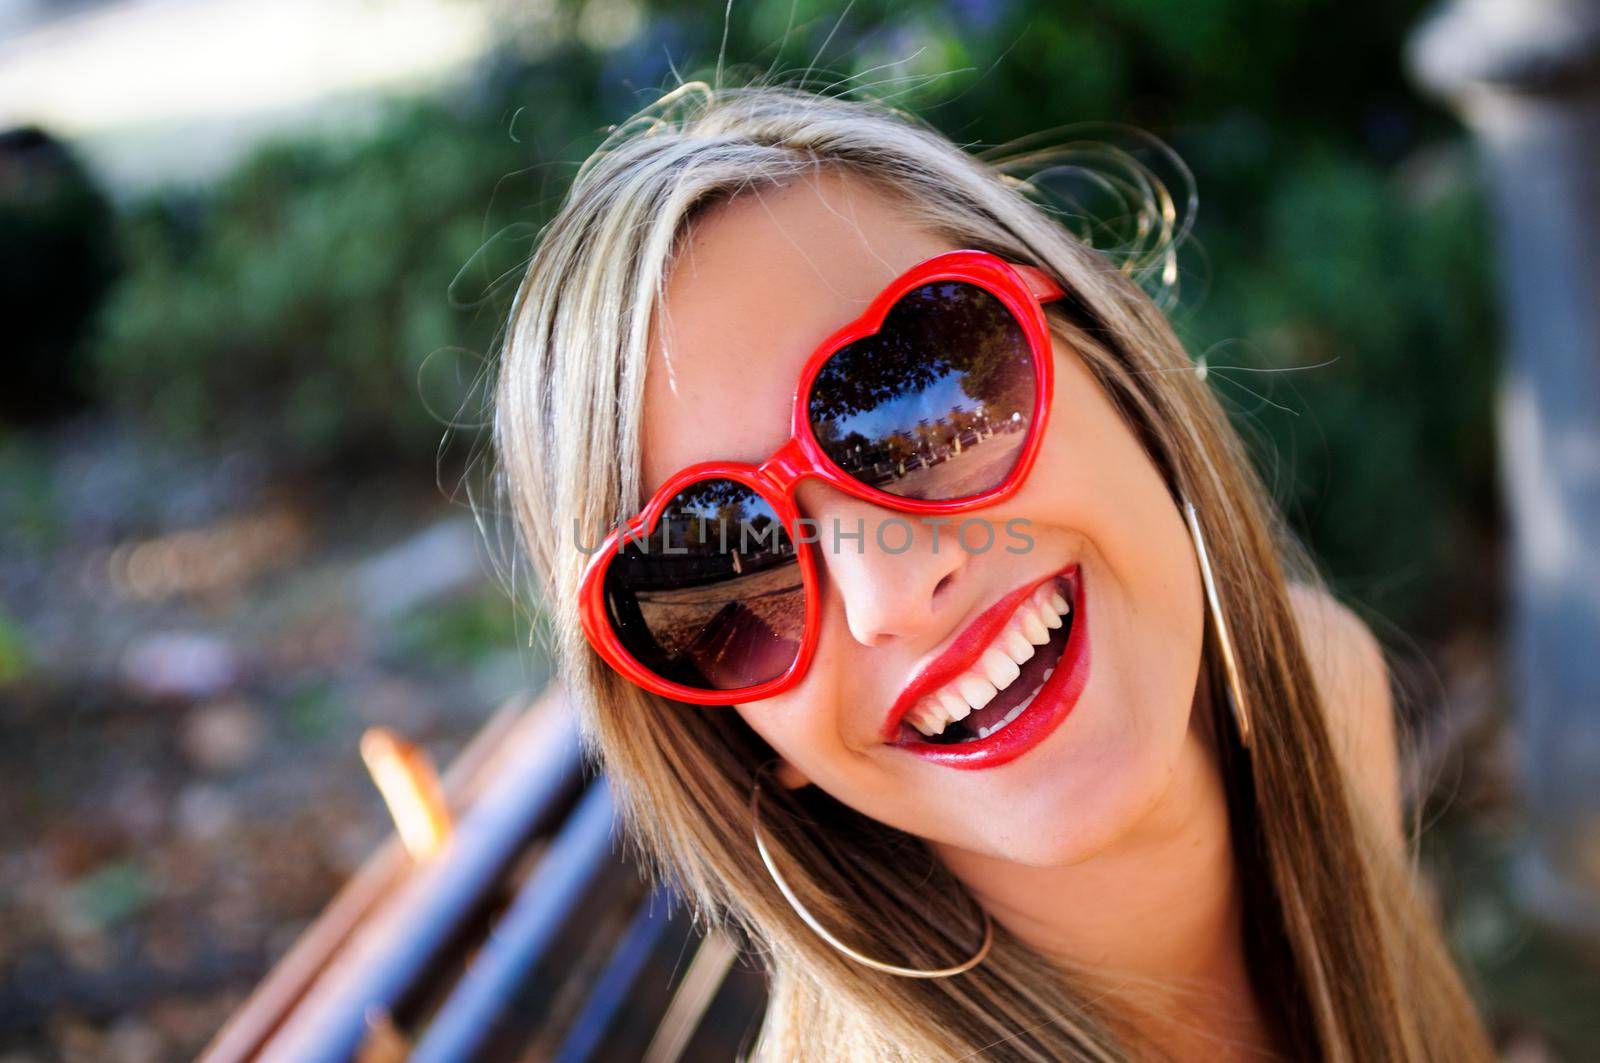 Funny girl with red heart glasses in a park